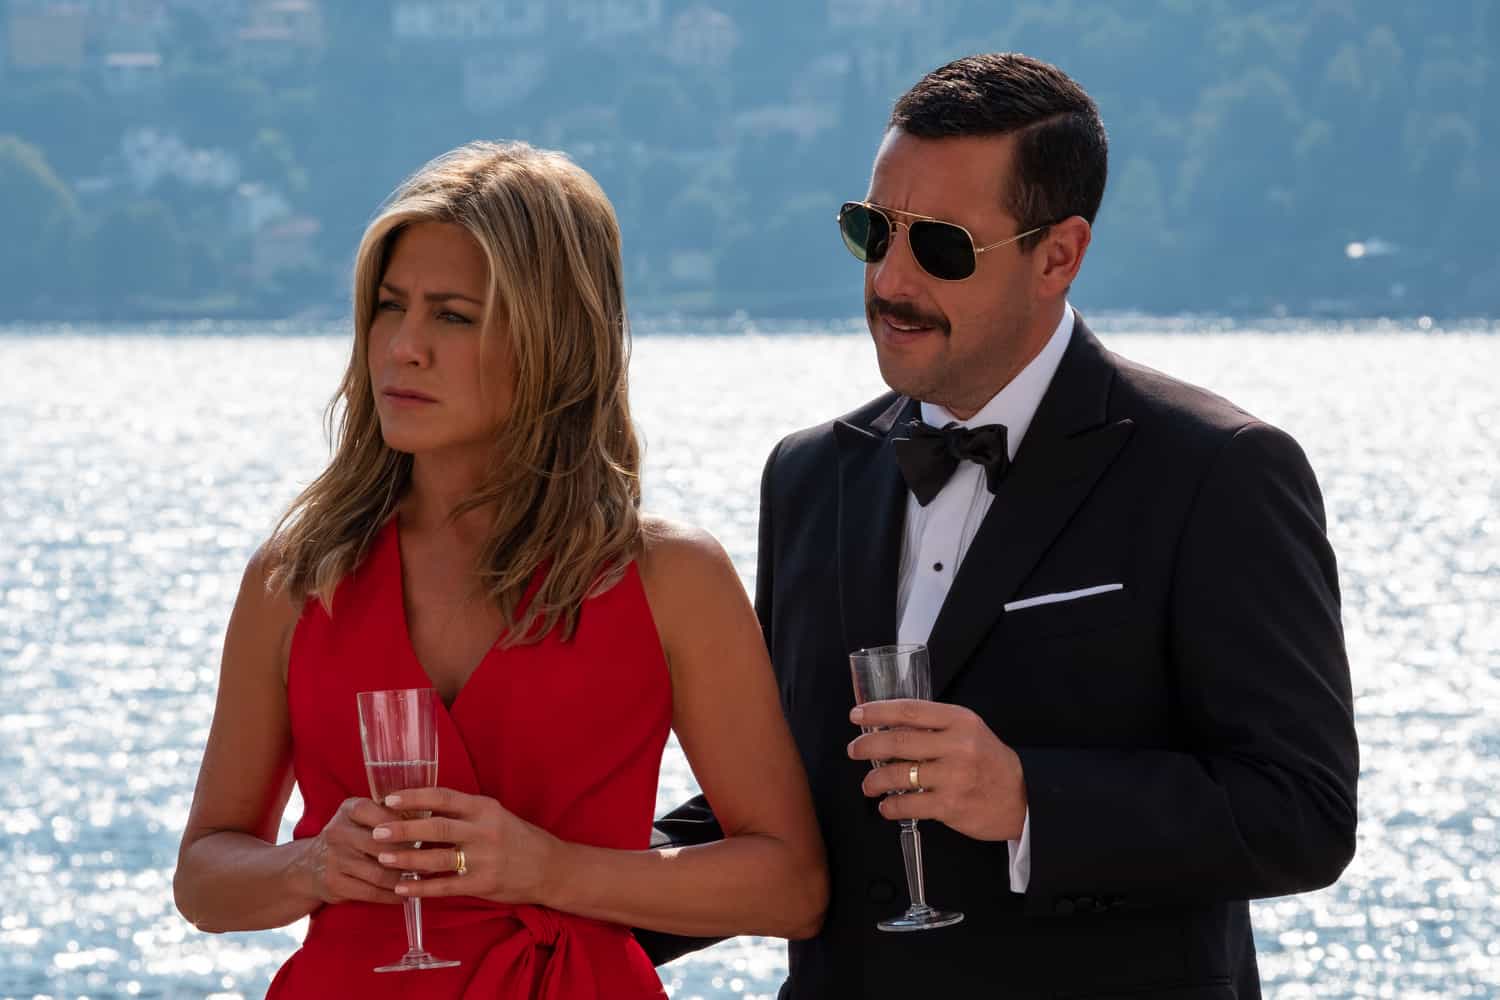 Jennifer Aniston and Adam Sandler in this image from Netflix